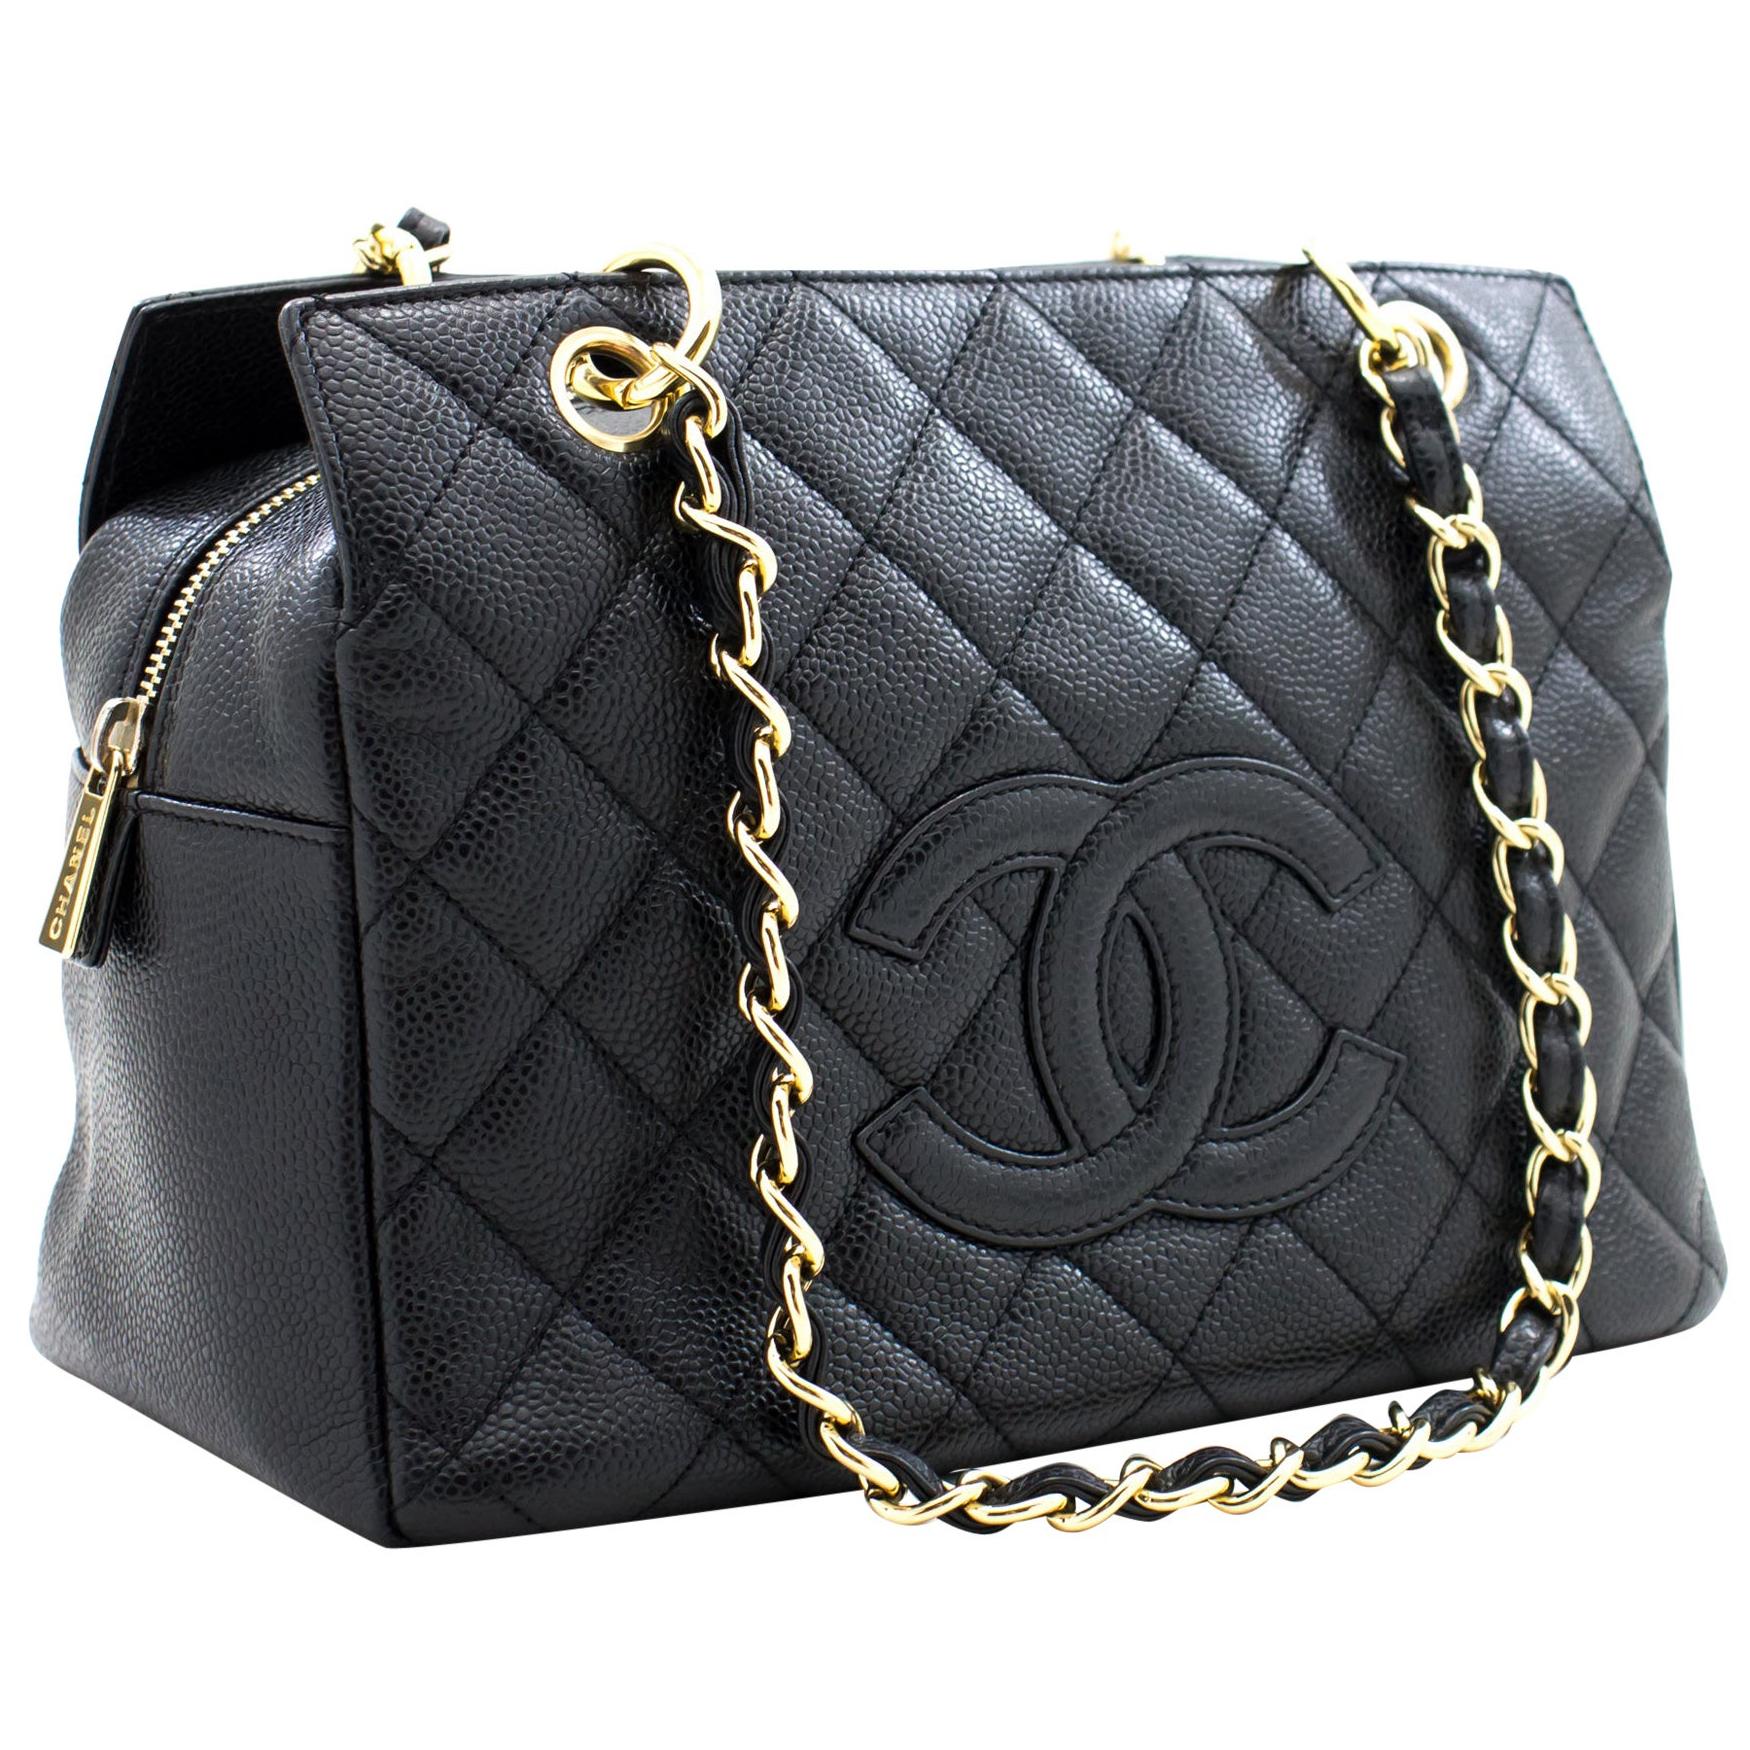 CHANEL Caviar Chain Shoulder Shopping Tote Bag Black Quilted Purse at ...